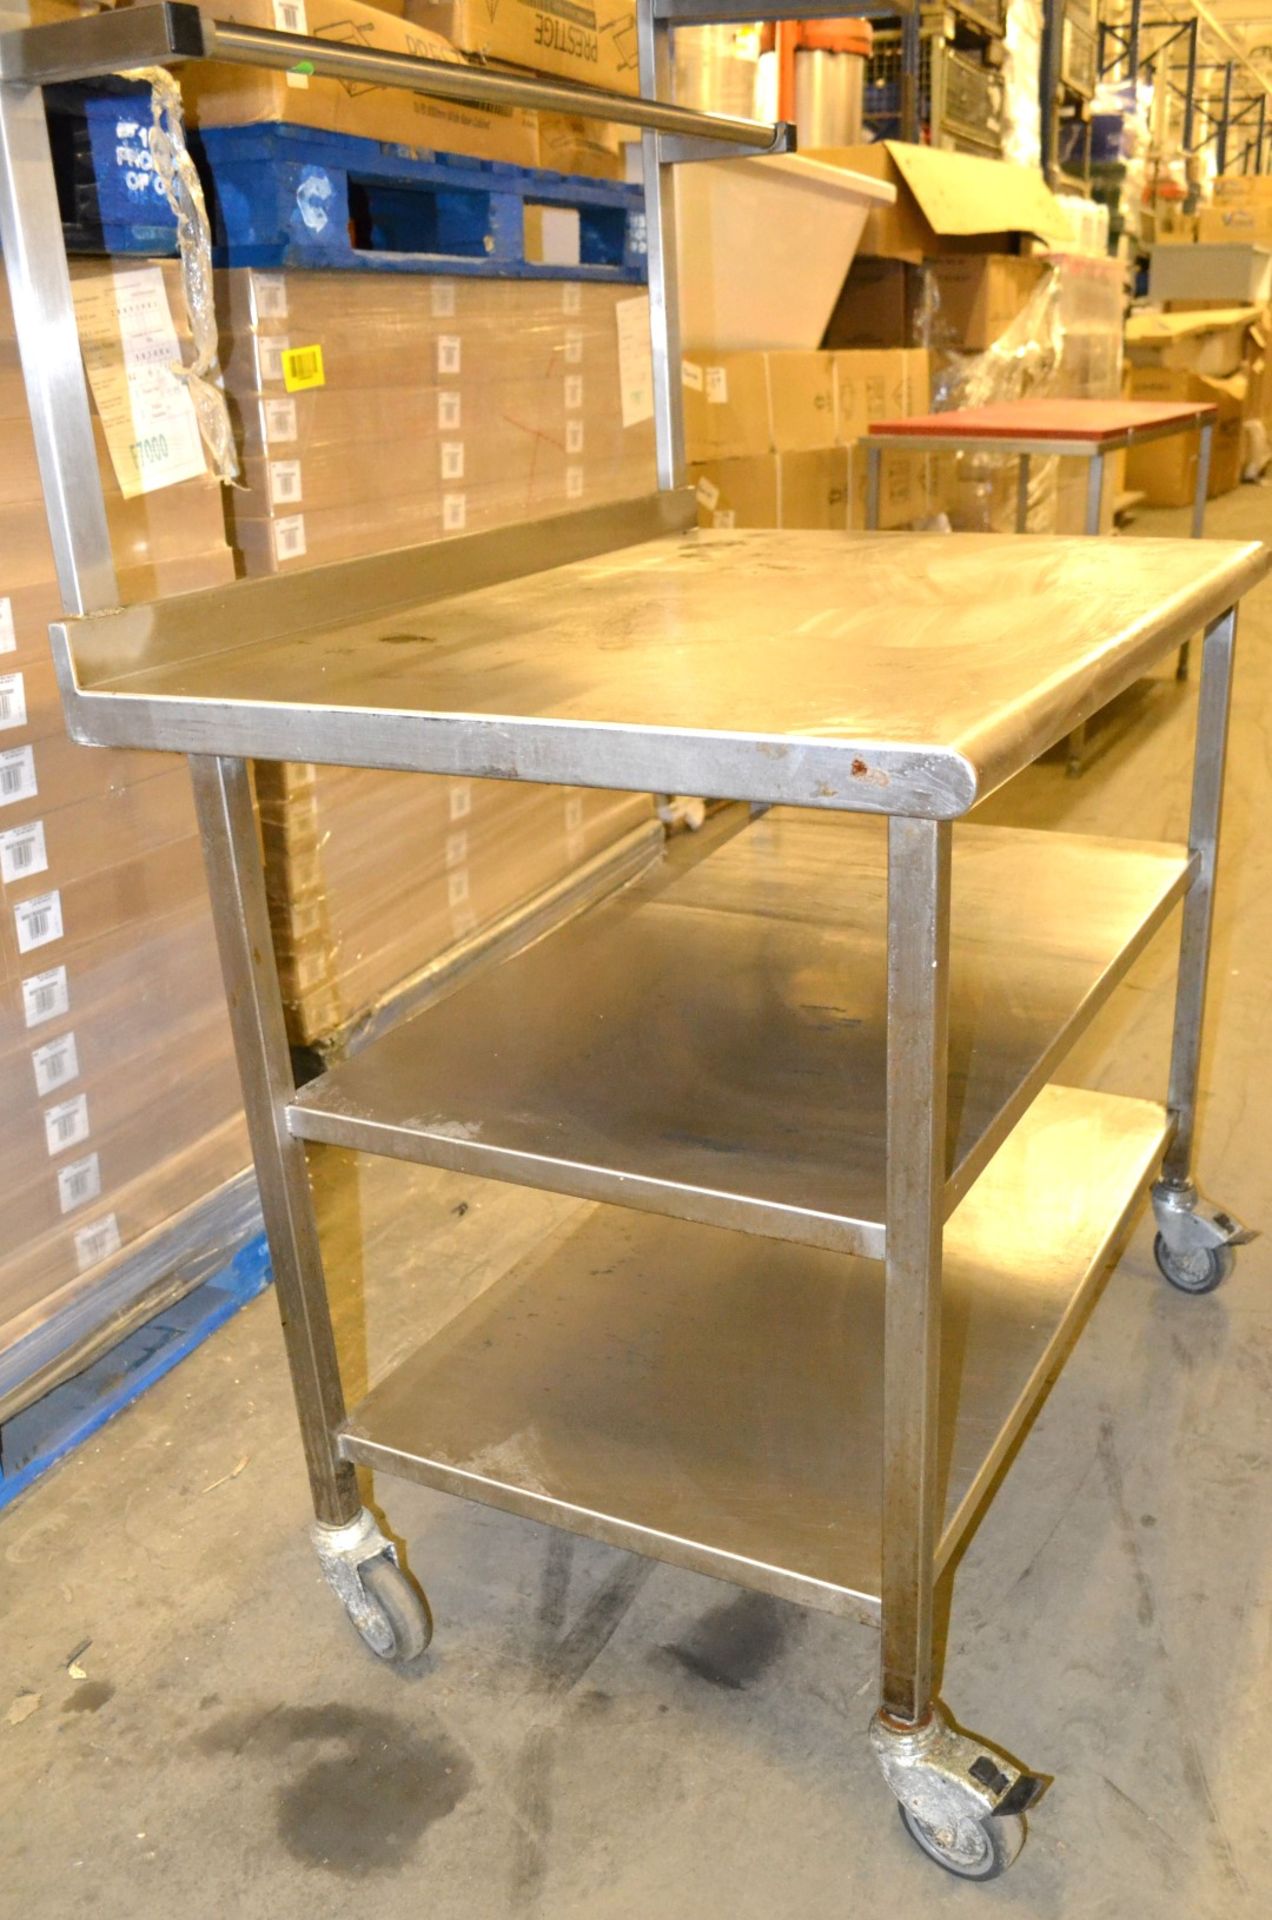 1 x Wheeled Stainless Steel Prep Table - Dimensions: 100 x 69.5 x 148cm - Ref: MC120 - CL282 - Locat - Image 11 of 11